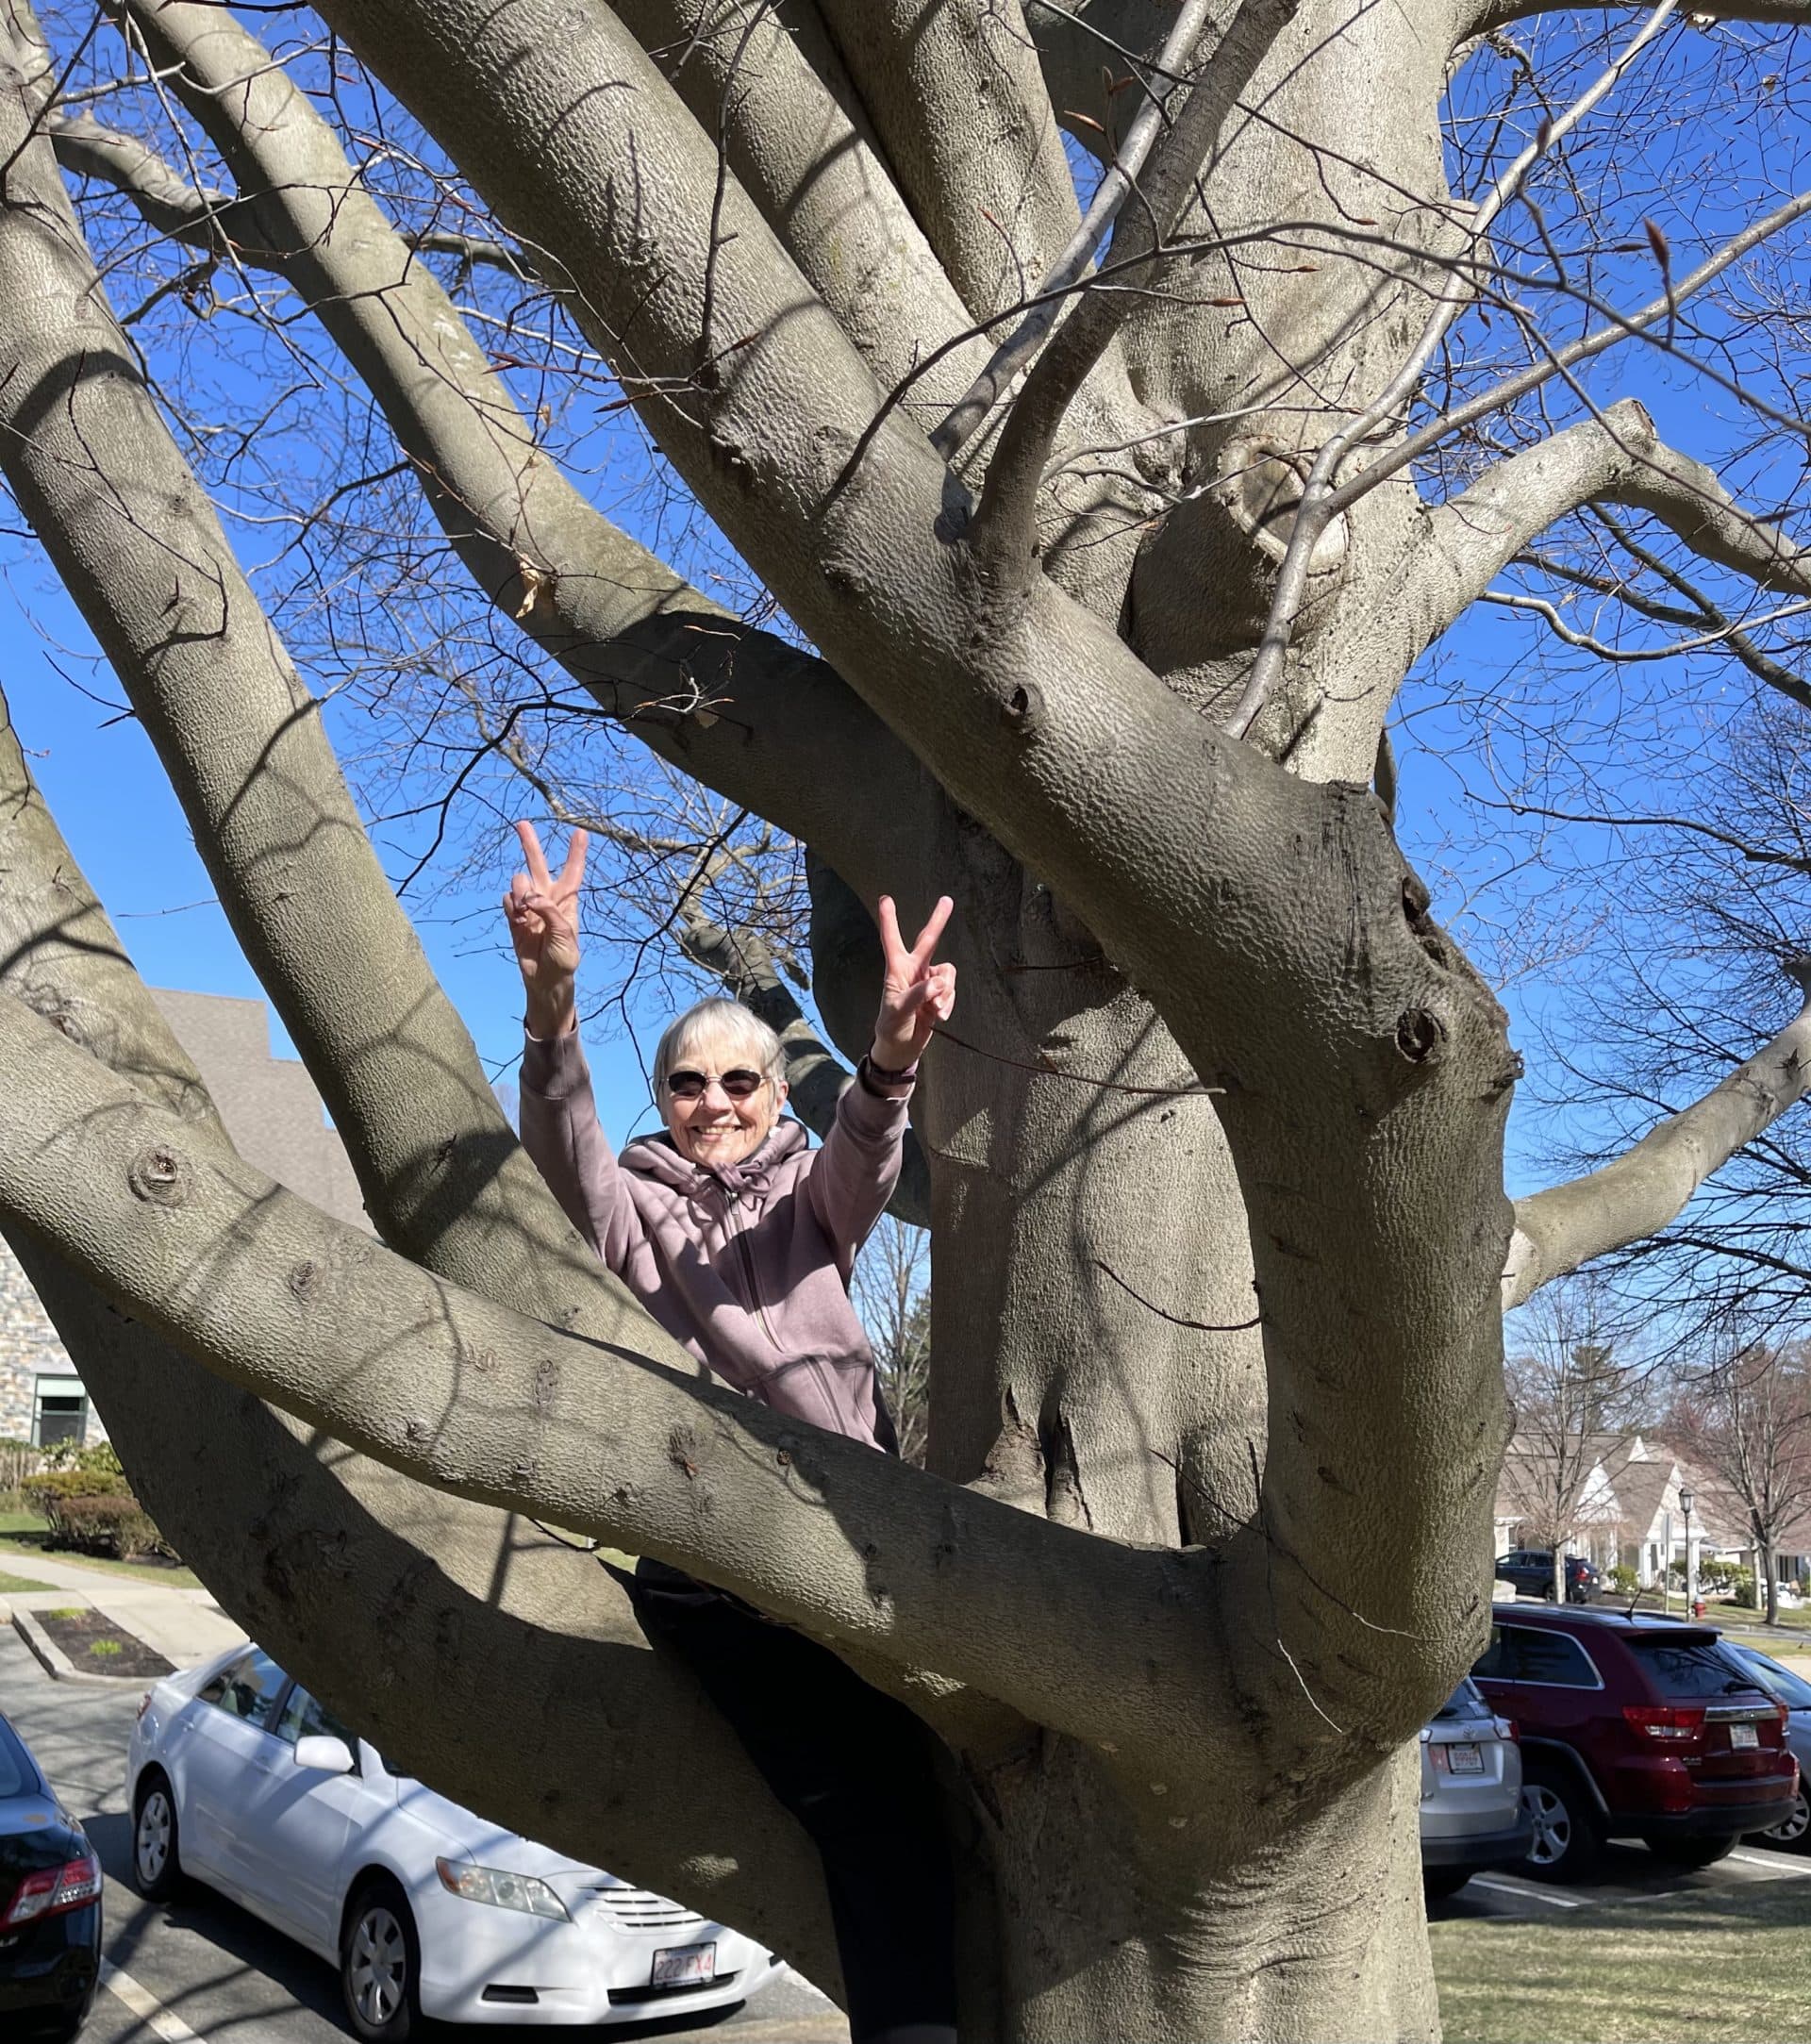 Sandy Kirchner, 81, climbed up a tree outside her Milton retirement home to signal that spring had arrived. (Courtesy of Sandy Kirchner)